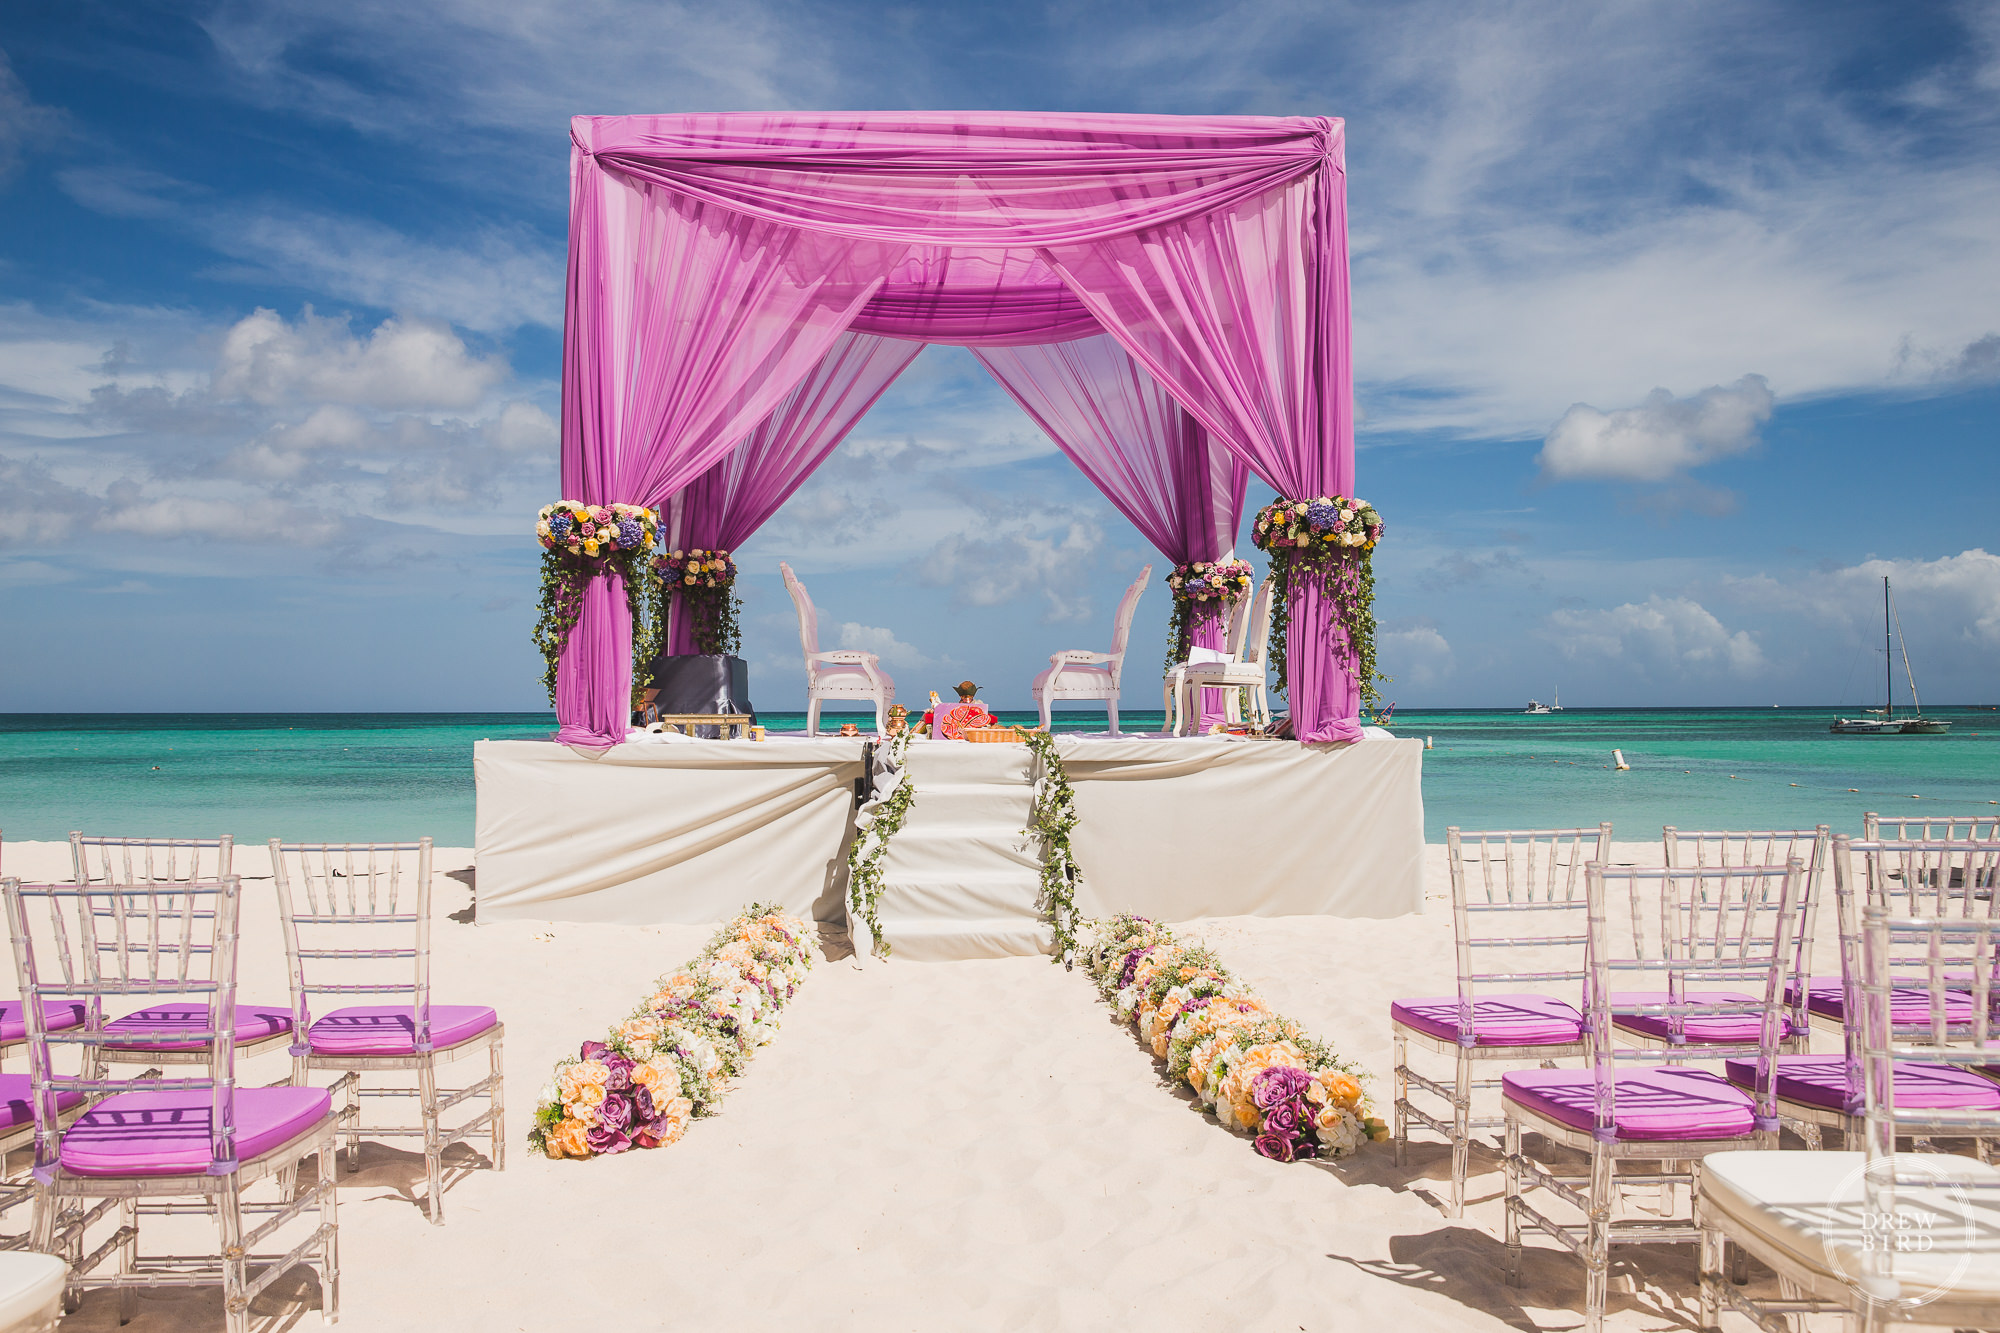 A detail photo of the stage, pink mandap, floral arrangements, and wedding seats with matching pink covers on the sand with the turquoise ocean and blue skies in the background for a Hindu wedding ceremony on the beach at the Hilton Aruba Resort in the Caribbean by Indian wedding phpotographer Drew Bird.